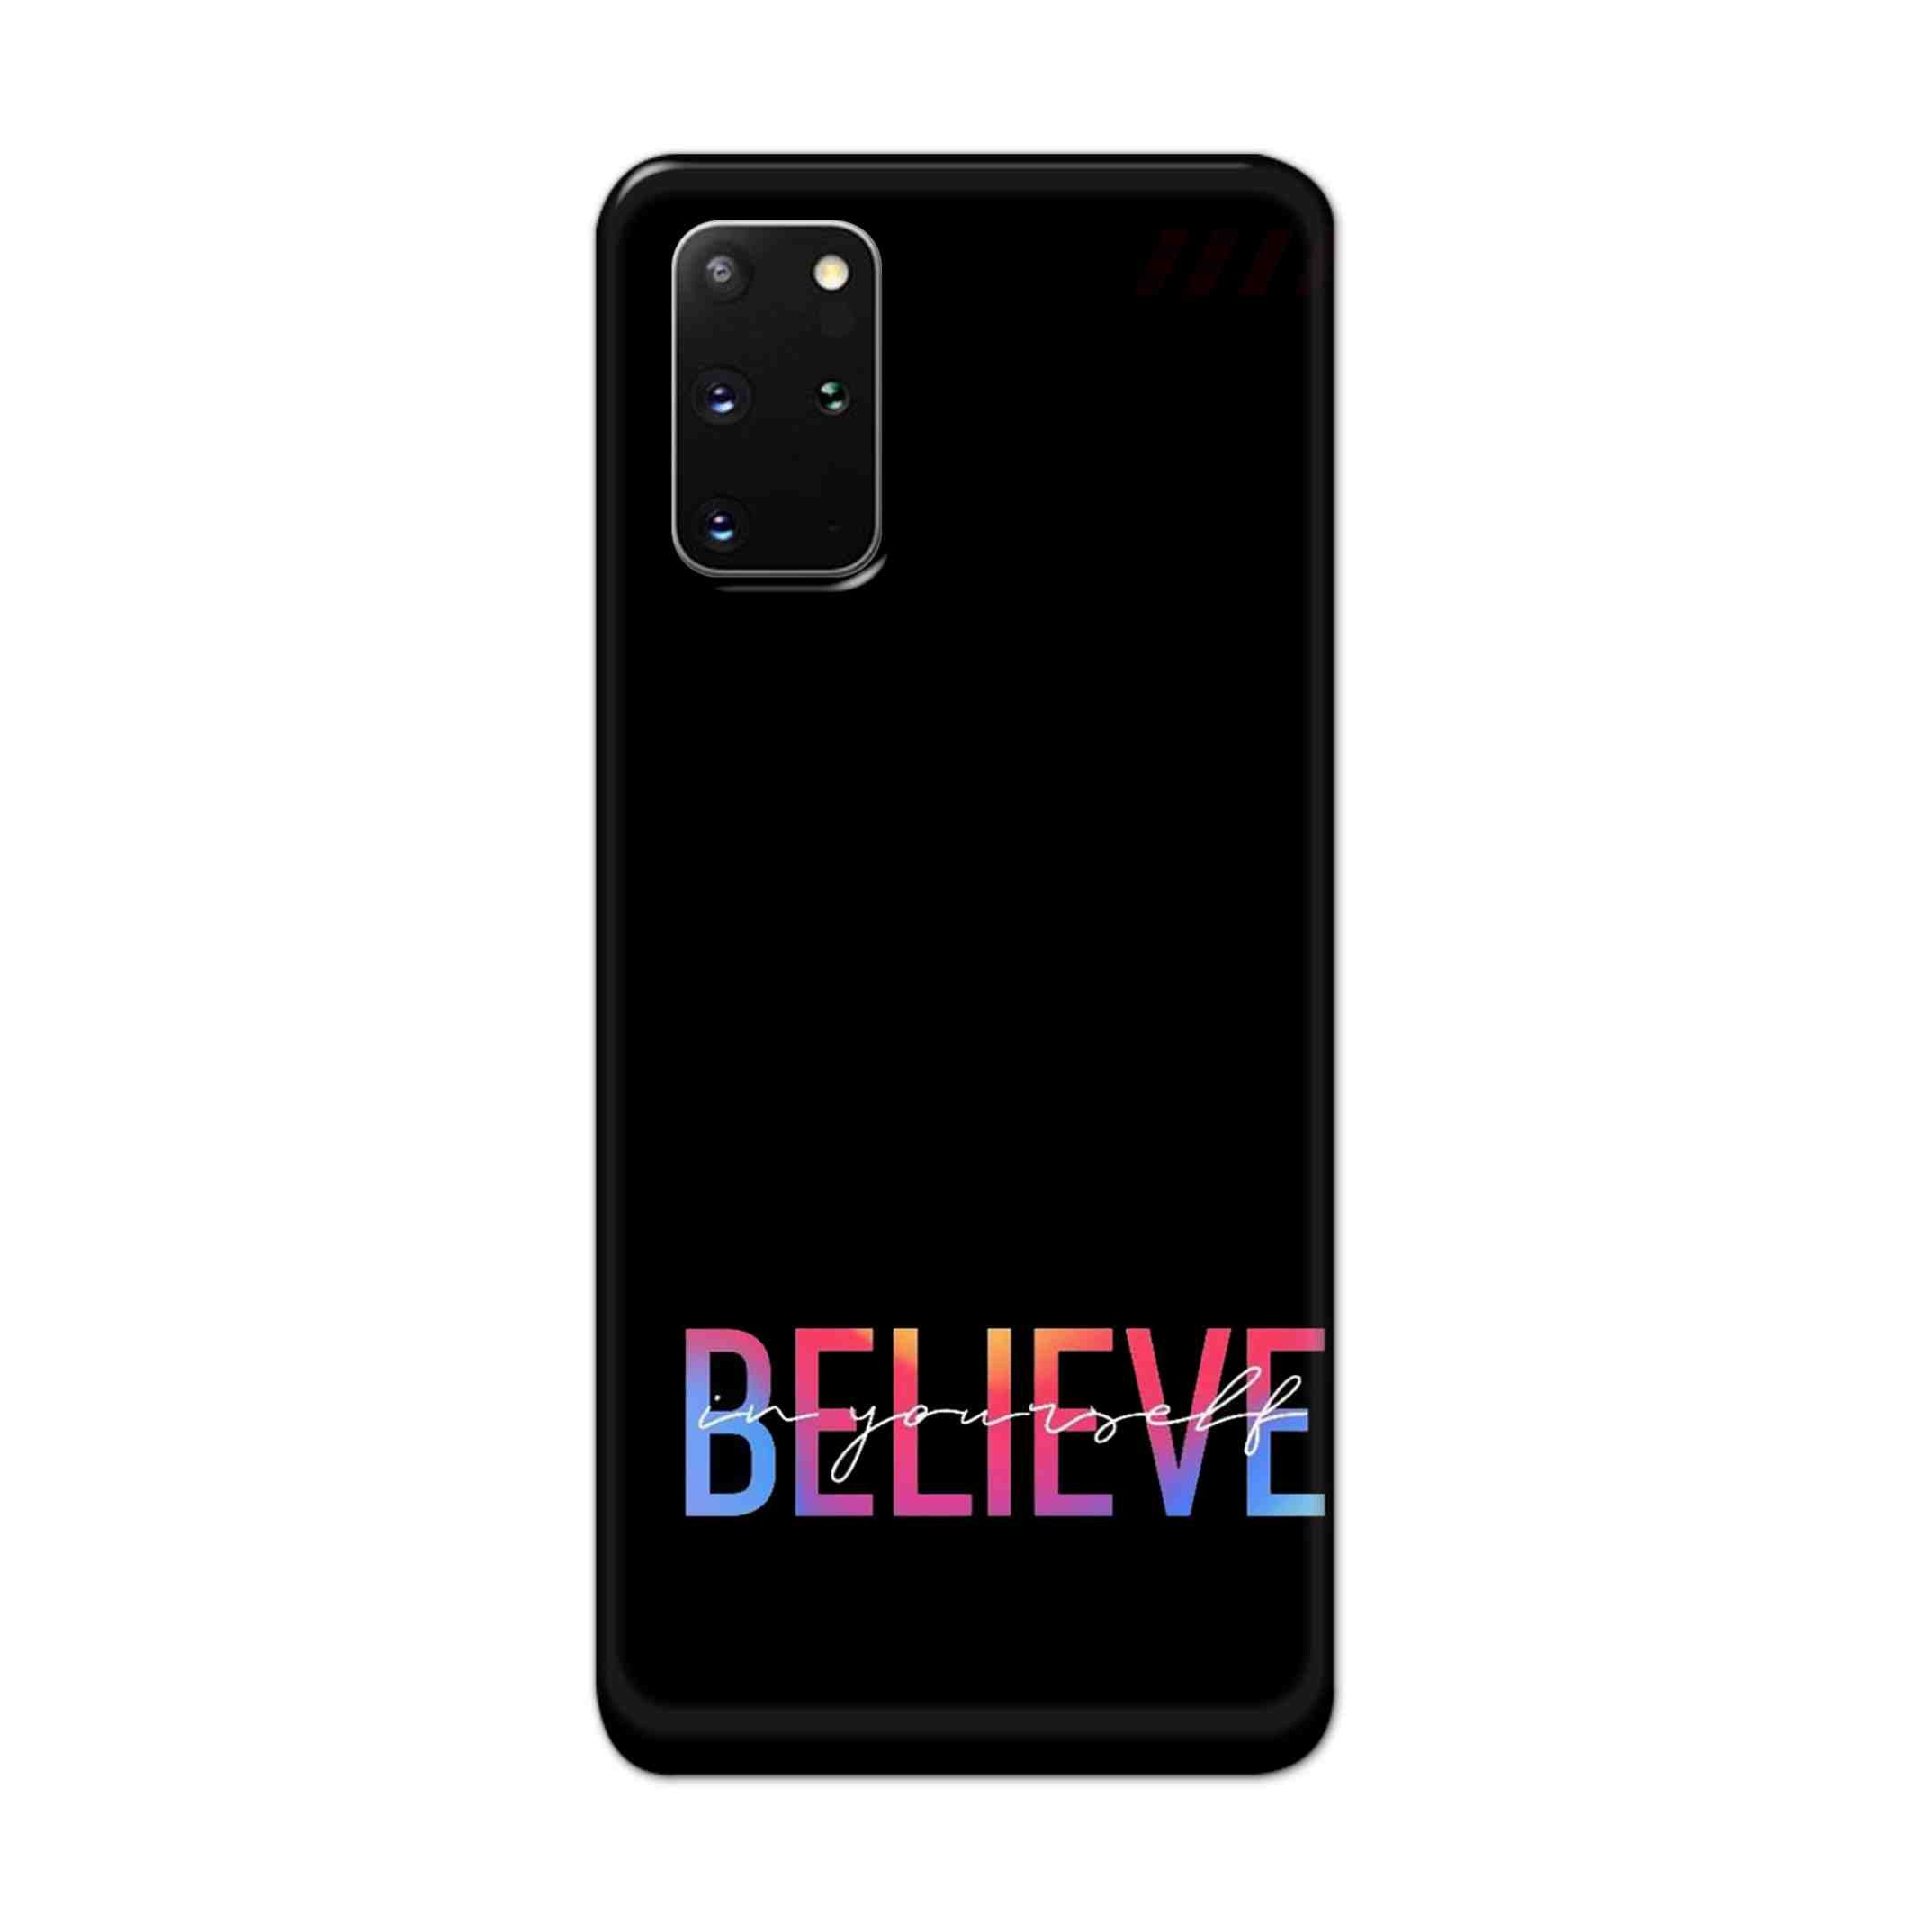 Buy Believe Hard Back Mobile Phone Case Cover For Samsung Galaxy S20 Plus Online